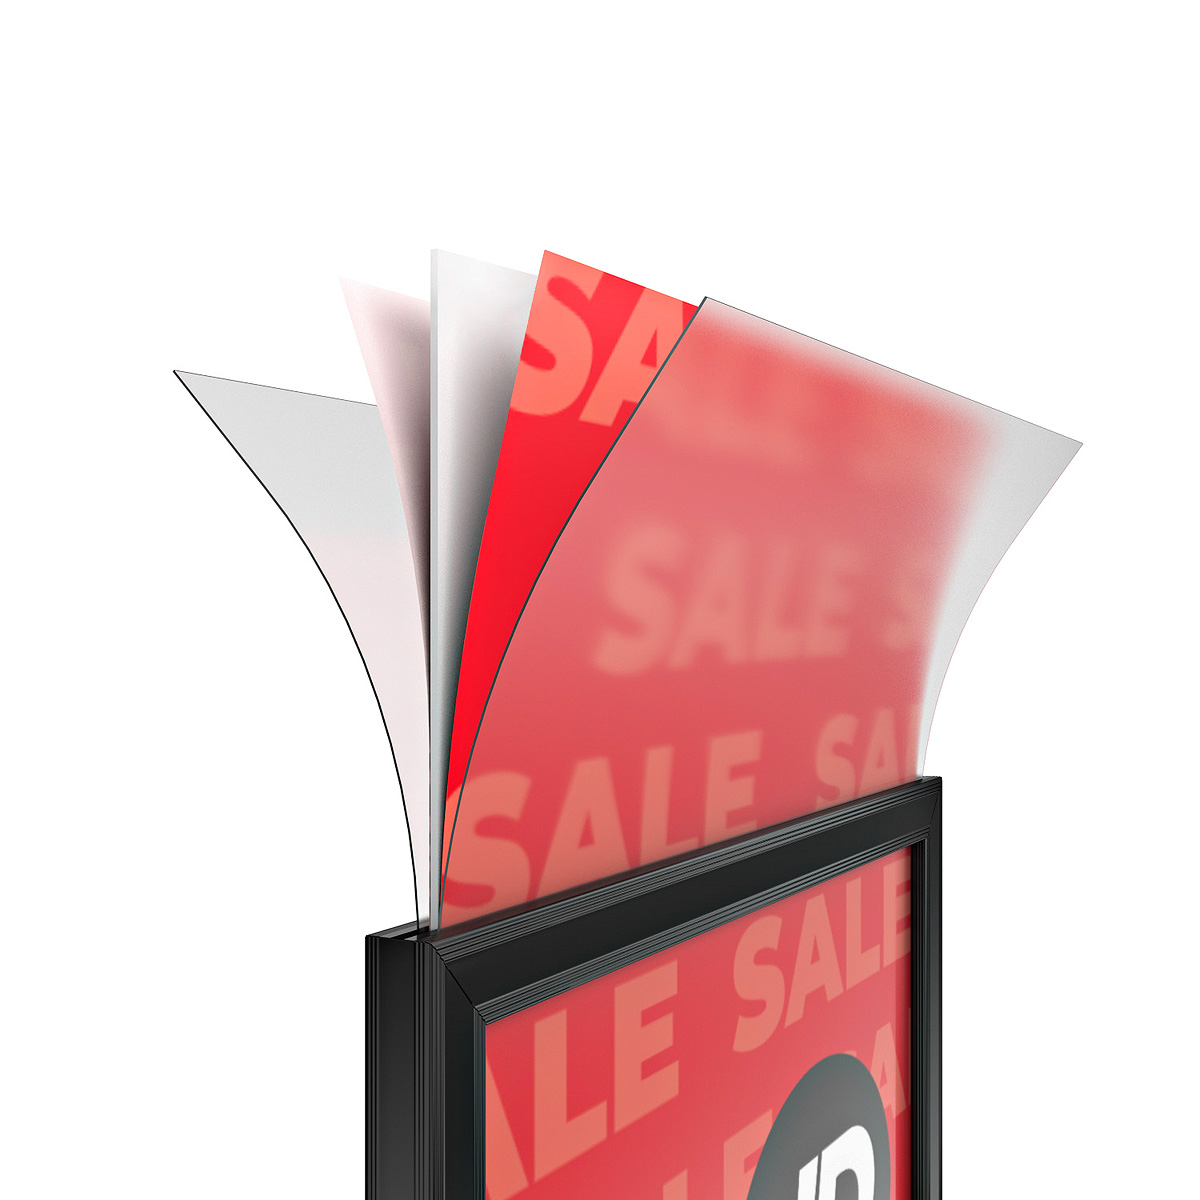 WindPro Slim Tall Pavement Sign Posters Are Inserted in The Top of The Frame